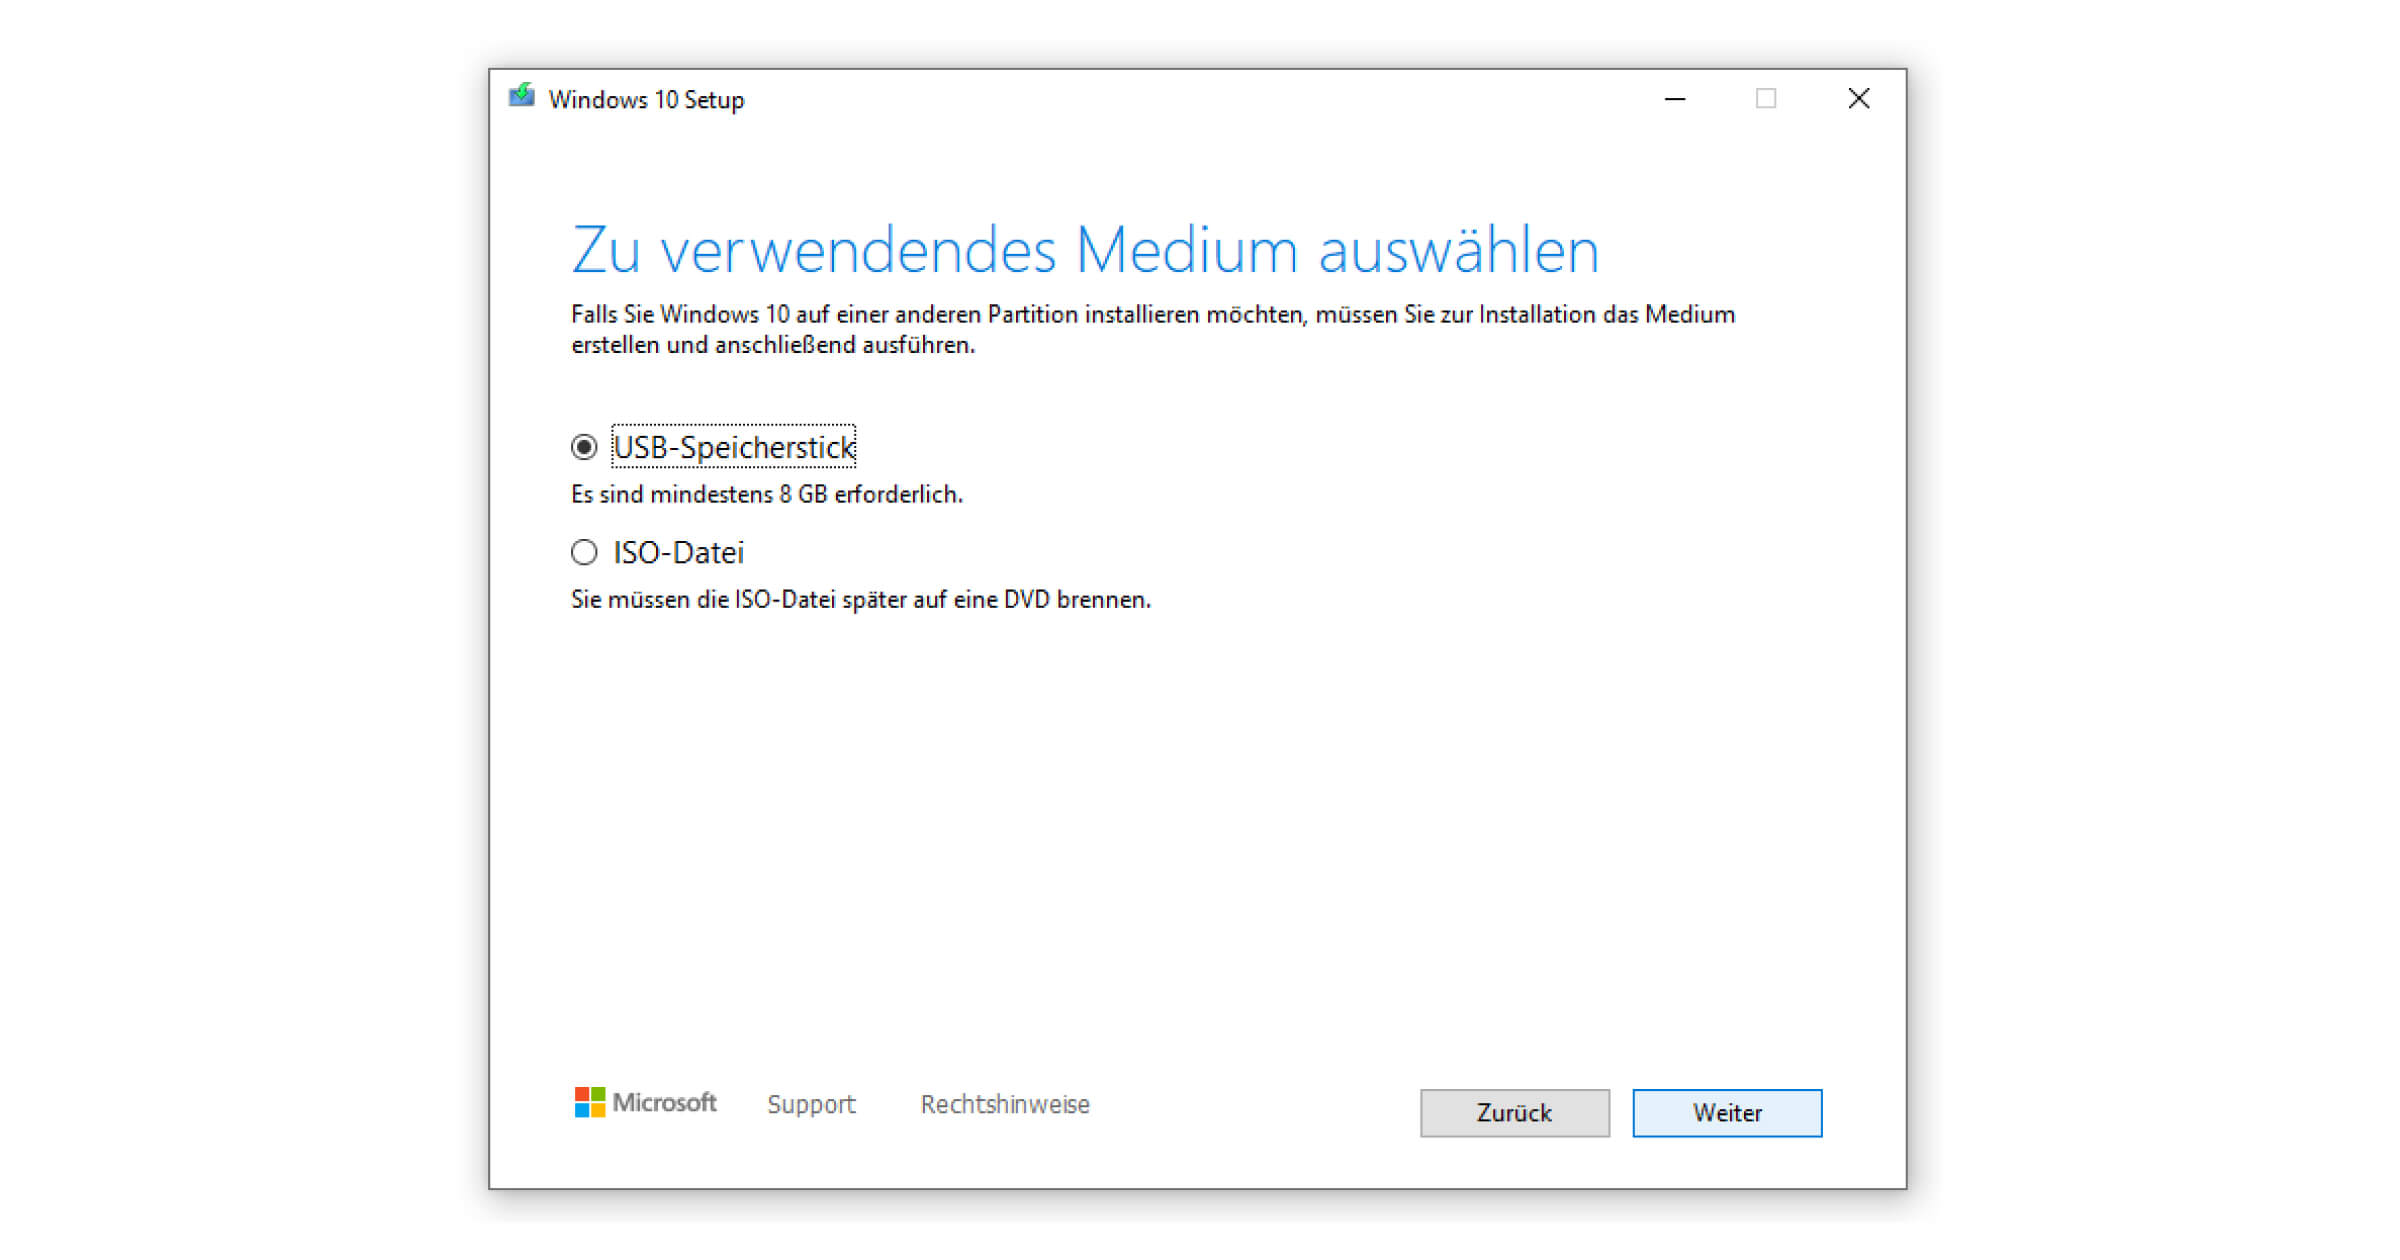 For the Windows 10 ISO file you need a DVD burner